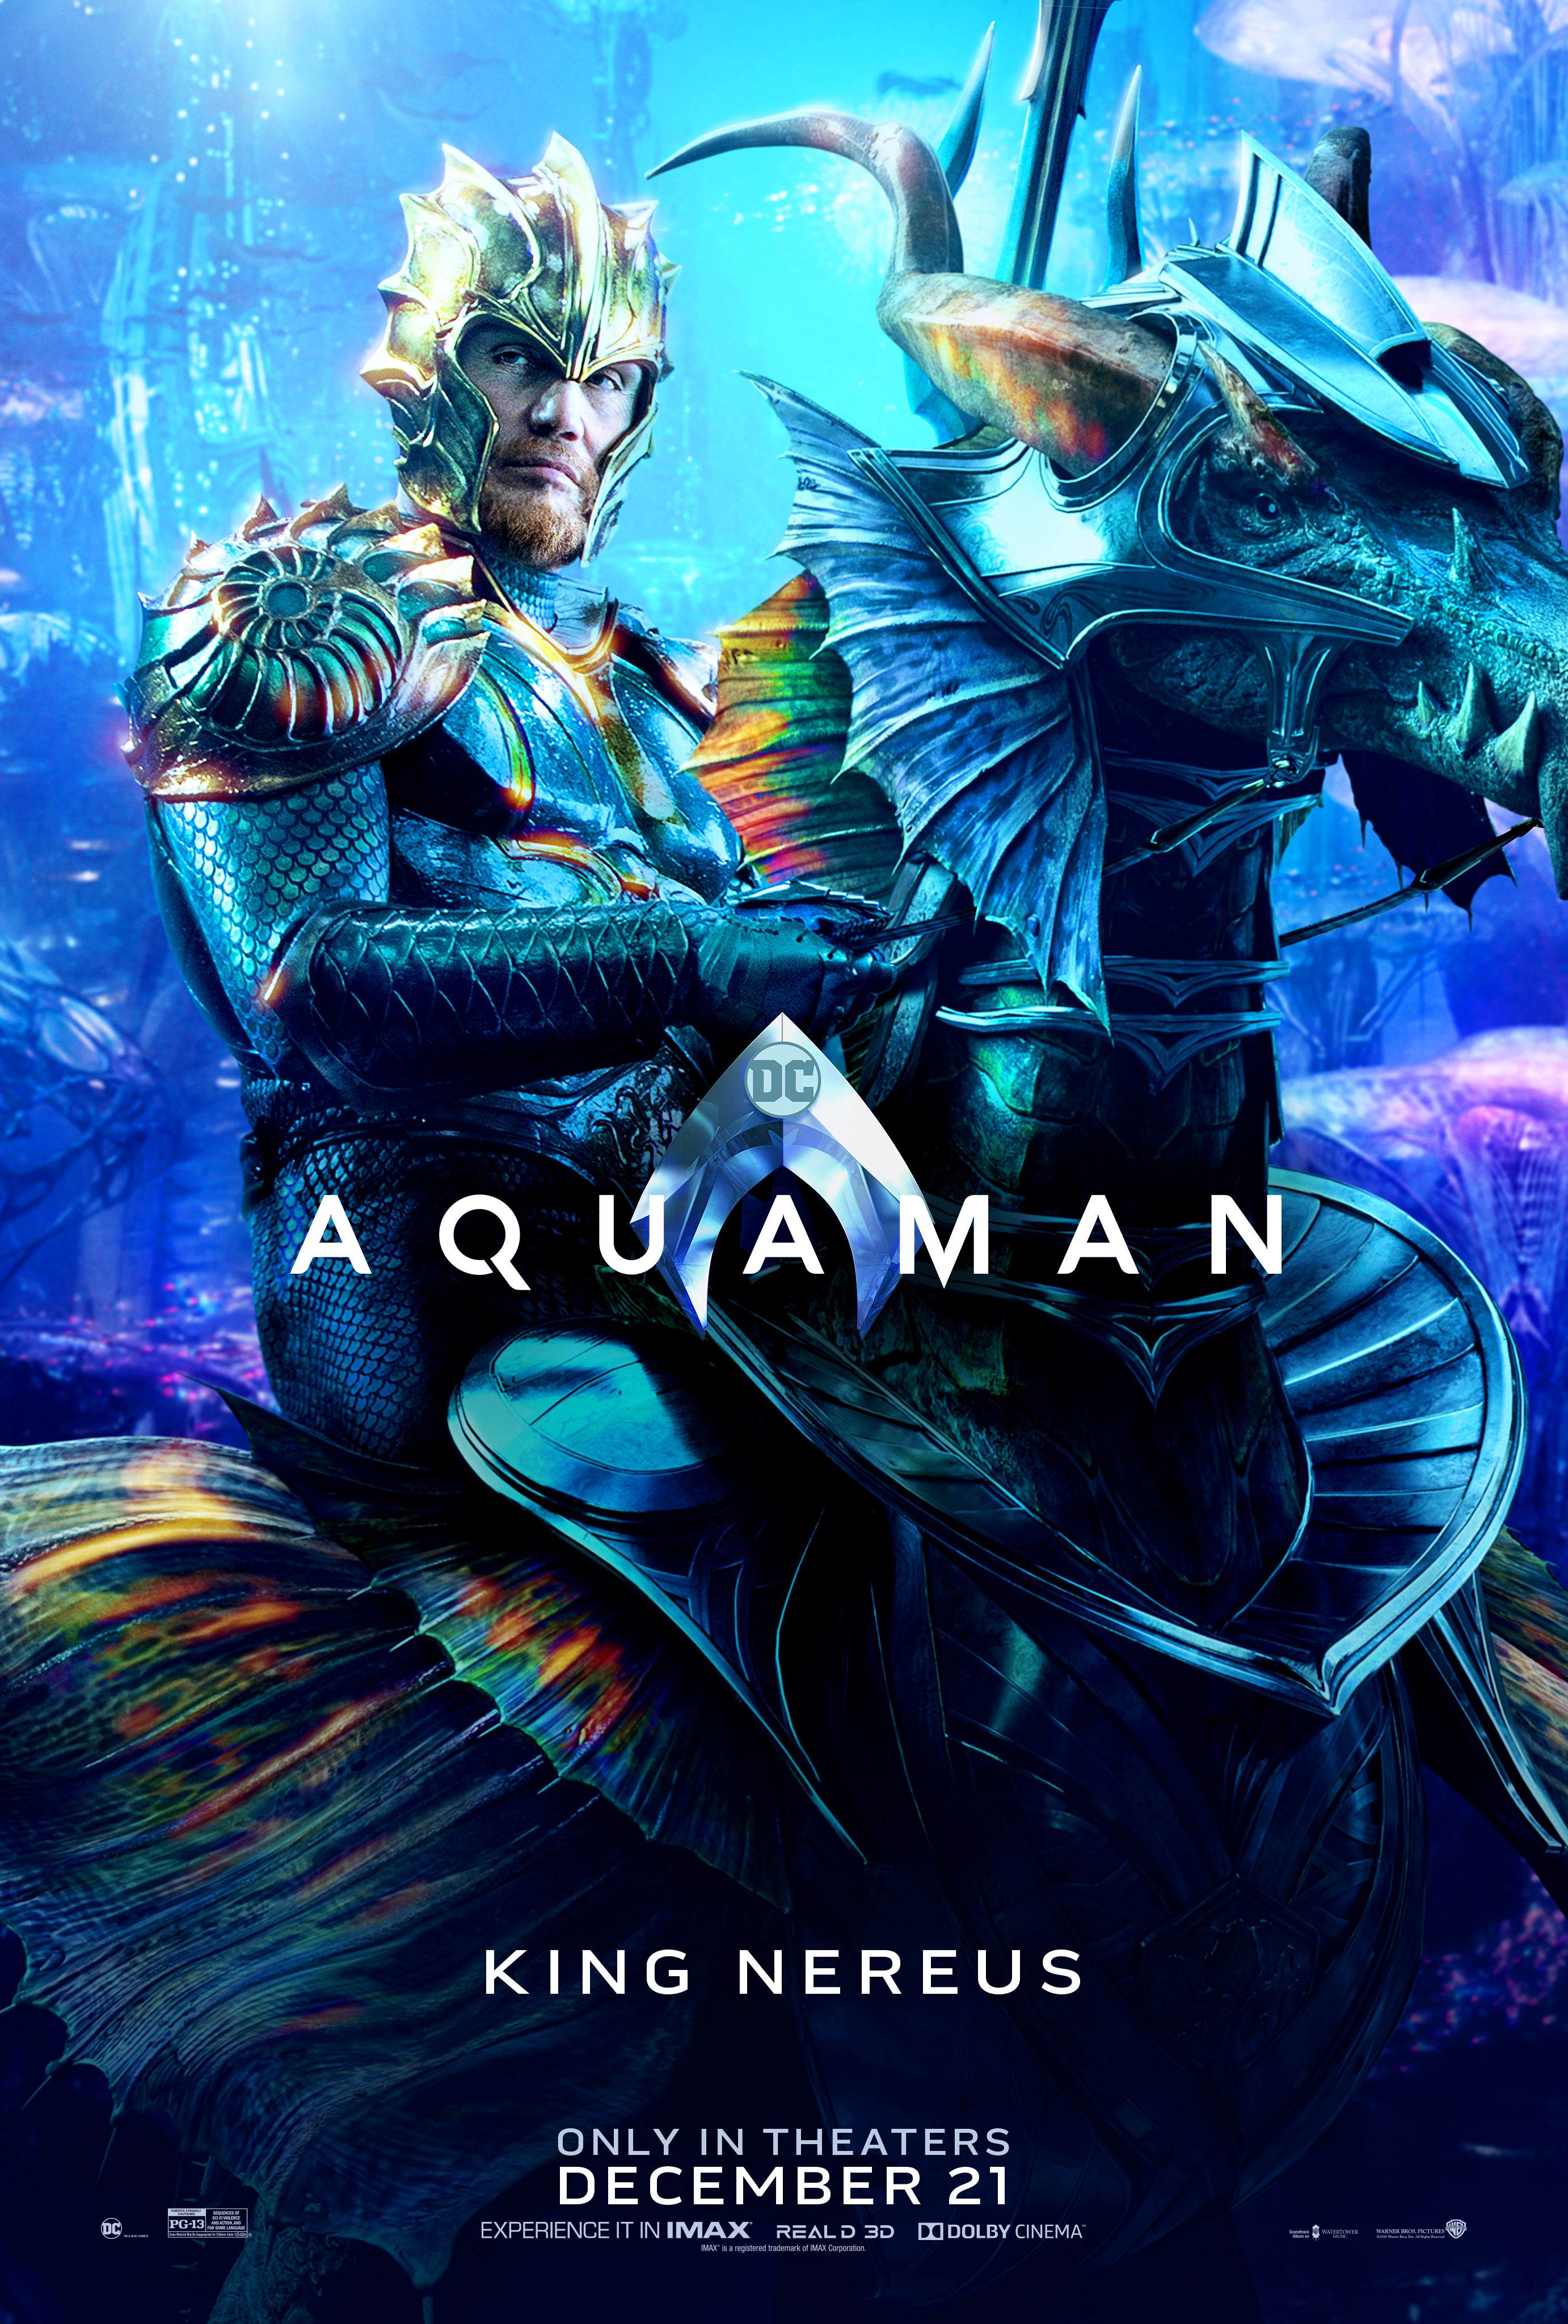 Aquaman Character Posters are Here and They are Gorgeous